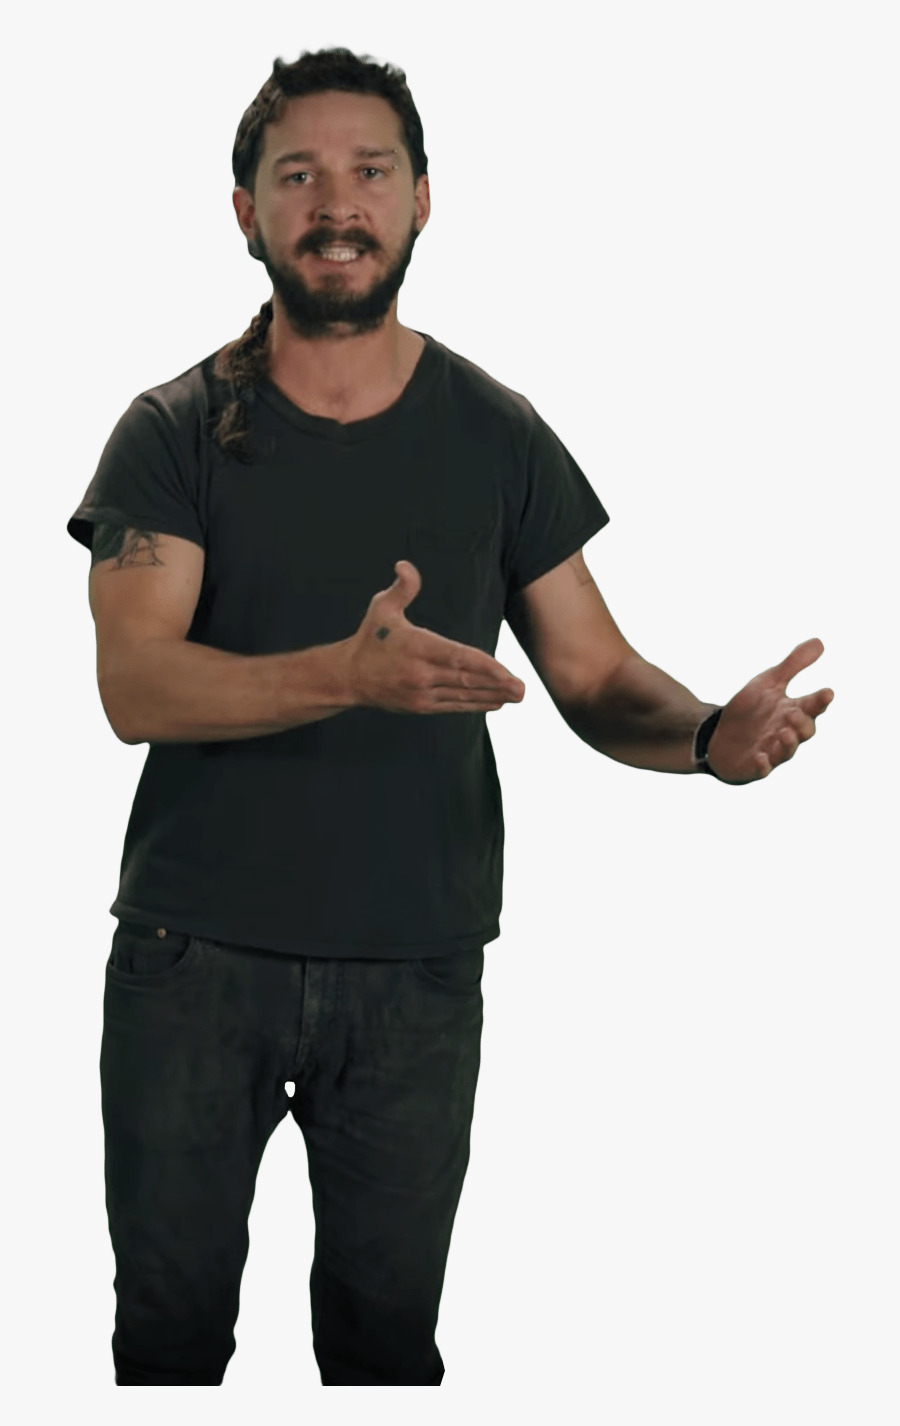 Angry Person Png - Shia Labeouf Png, Transparent Clipart